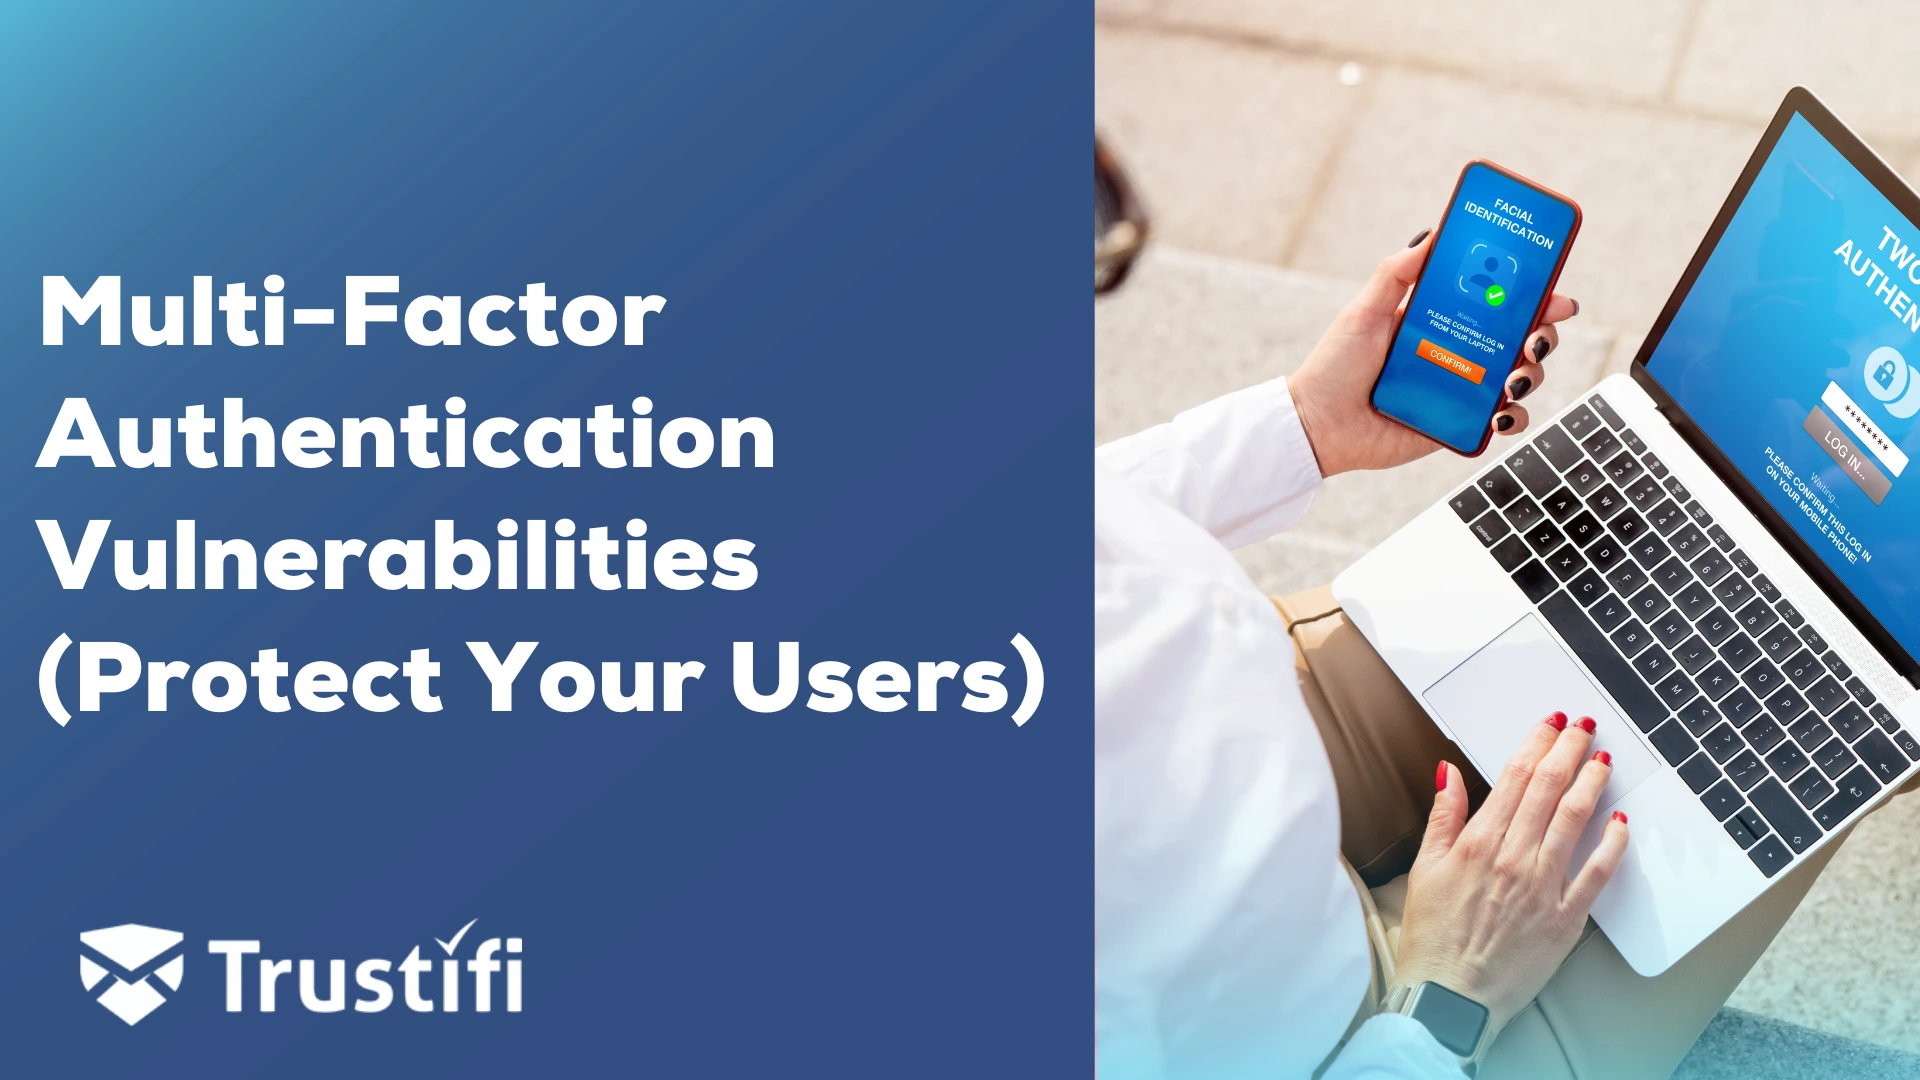 Multi-Factor Authentication: The Risk, Vulnerabilities, and How To Protect Your Users